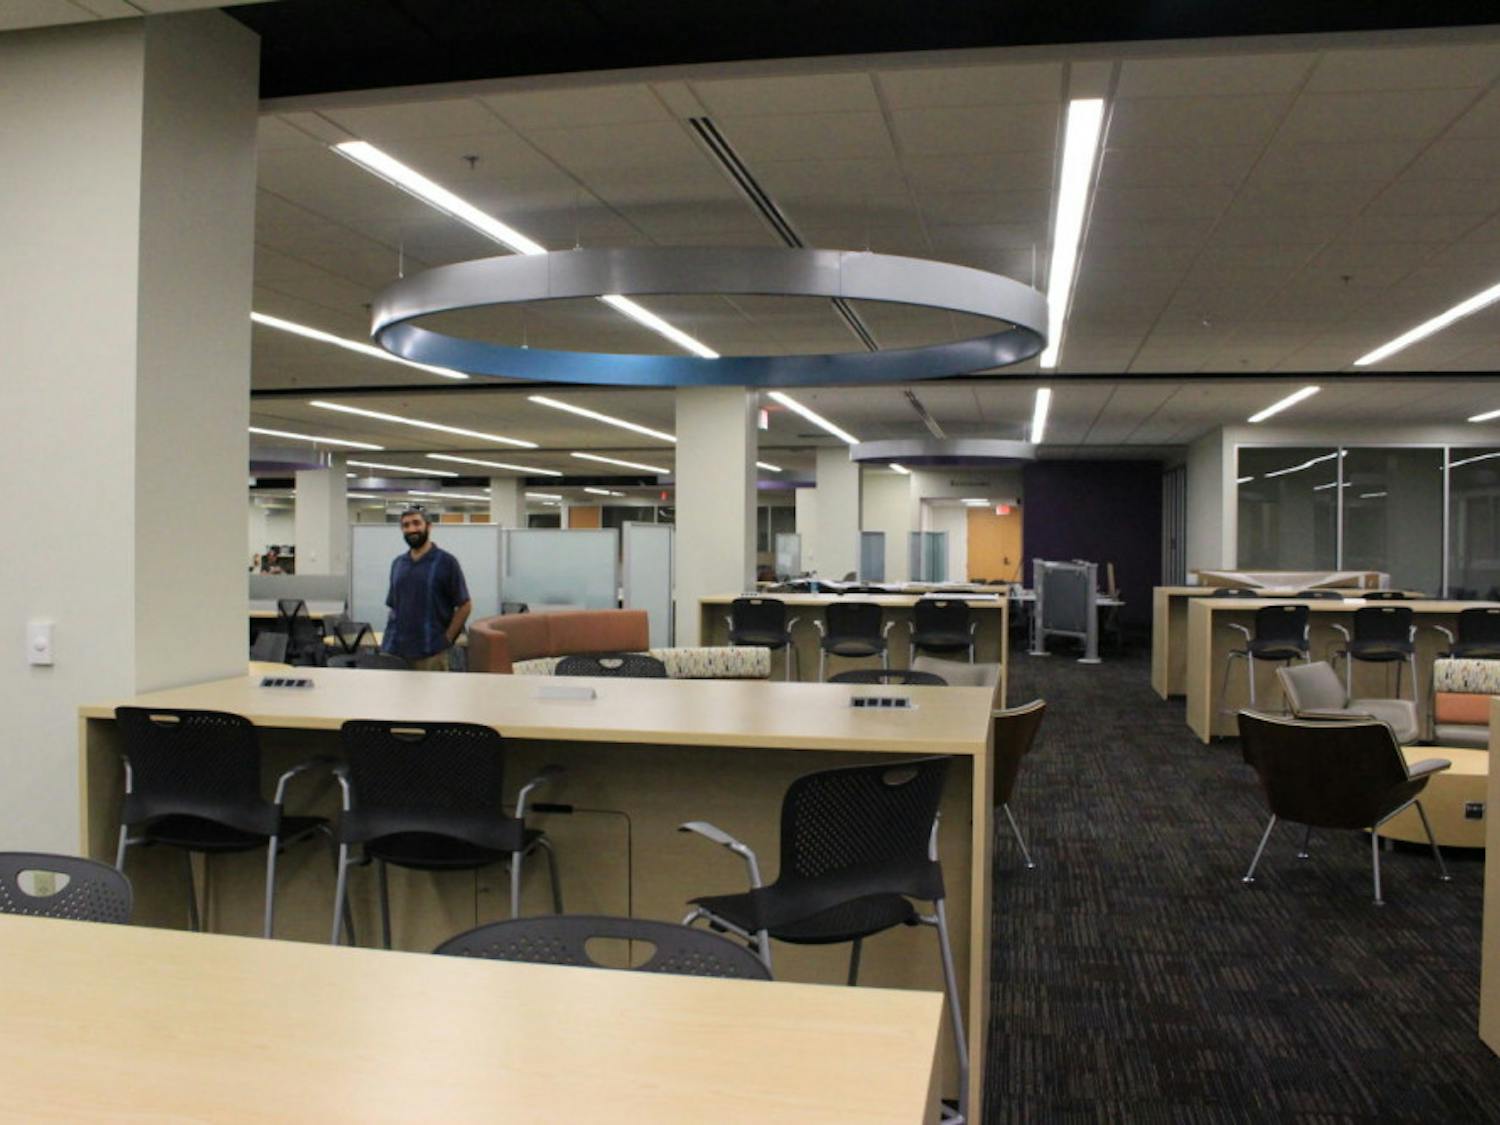 Marston Library's basement's renovations are almost finished. The area will reopen wednesday.&nbsp;